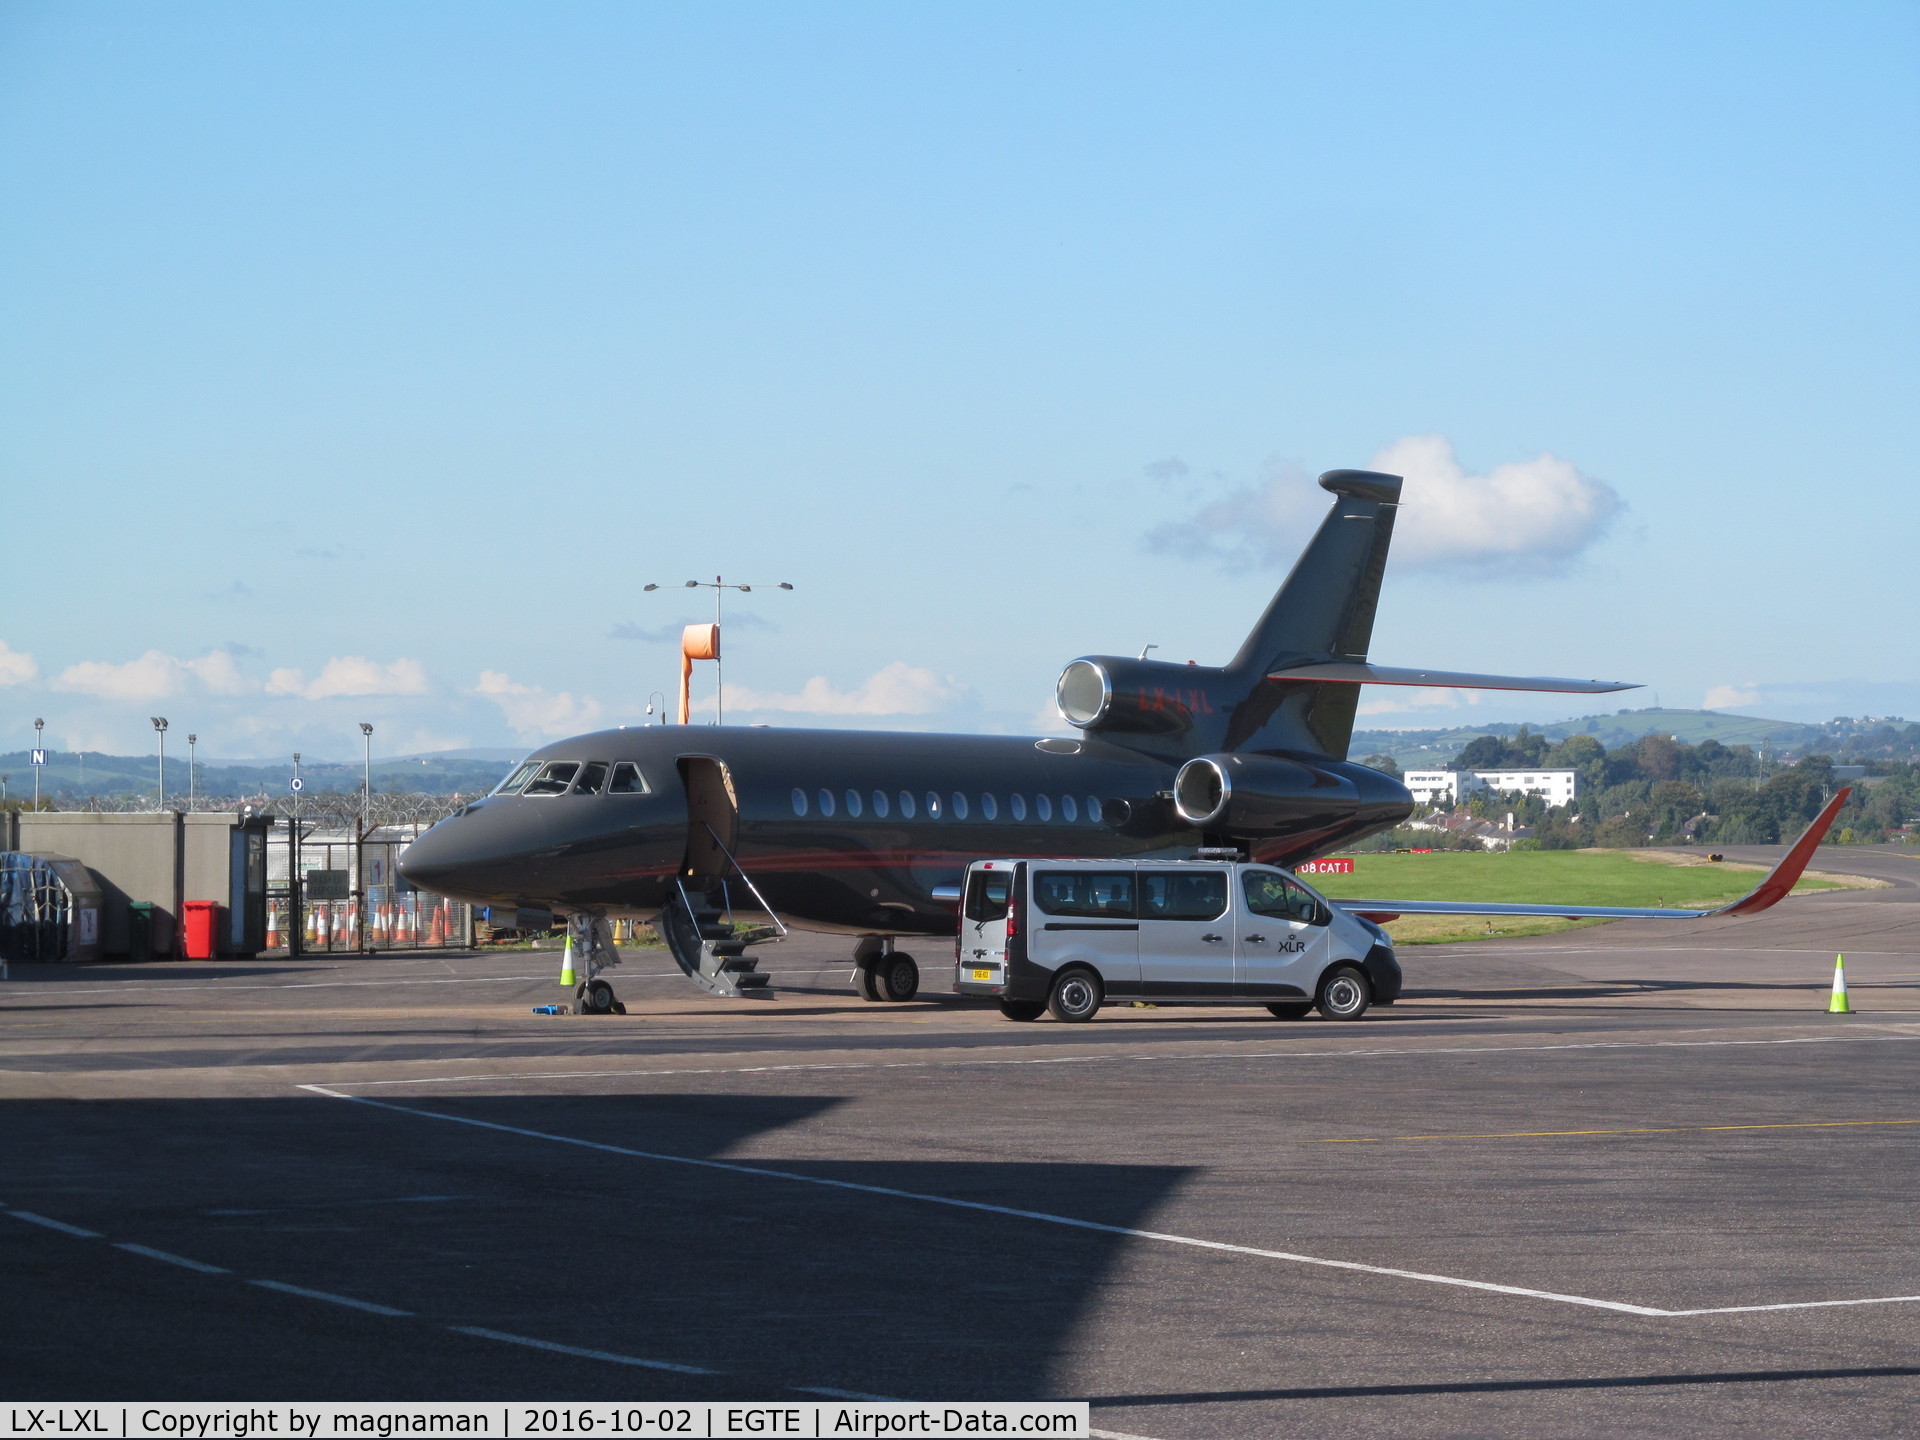 LX-LXL, 2001 Dassault Falcon 50EX C/N 315, at Exeter just after re-reg